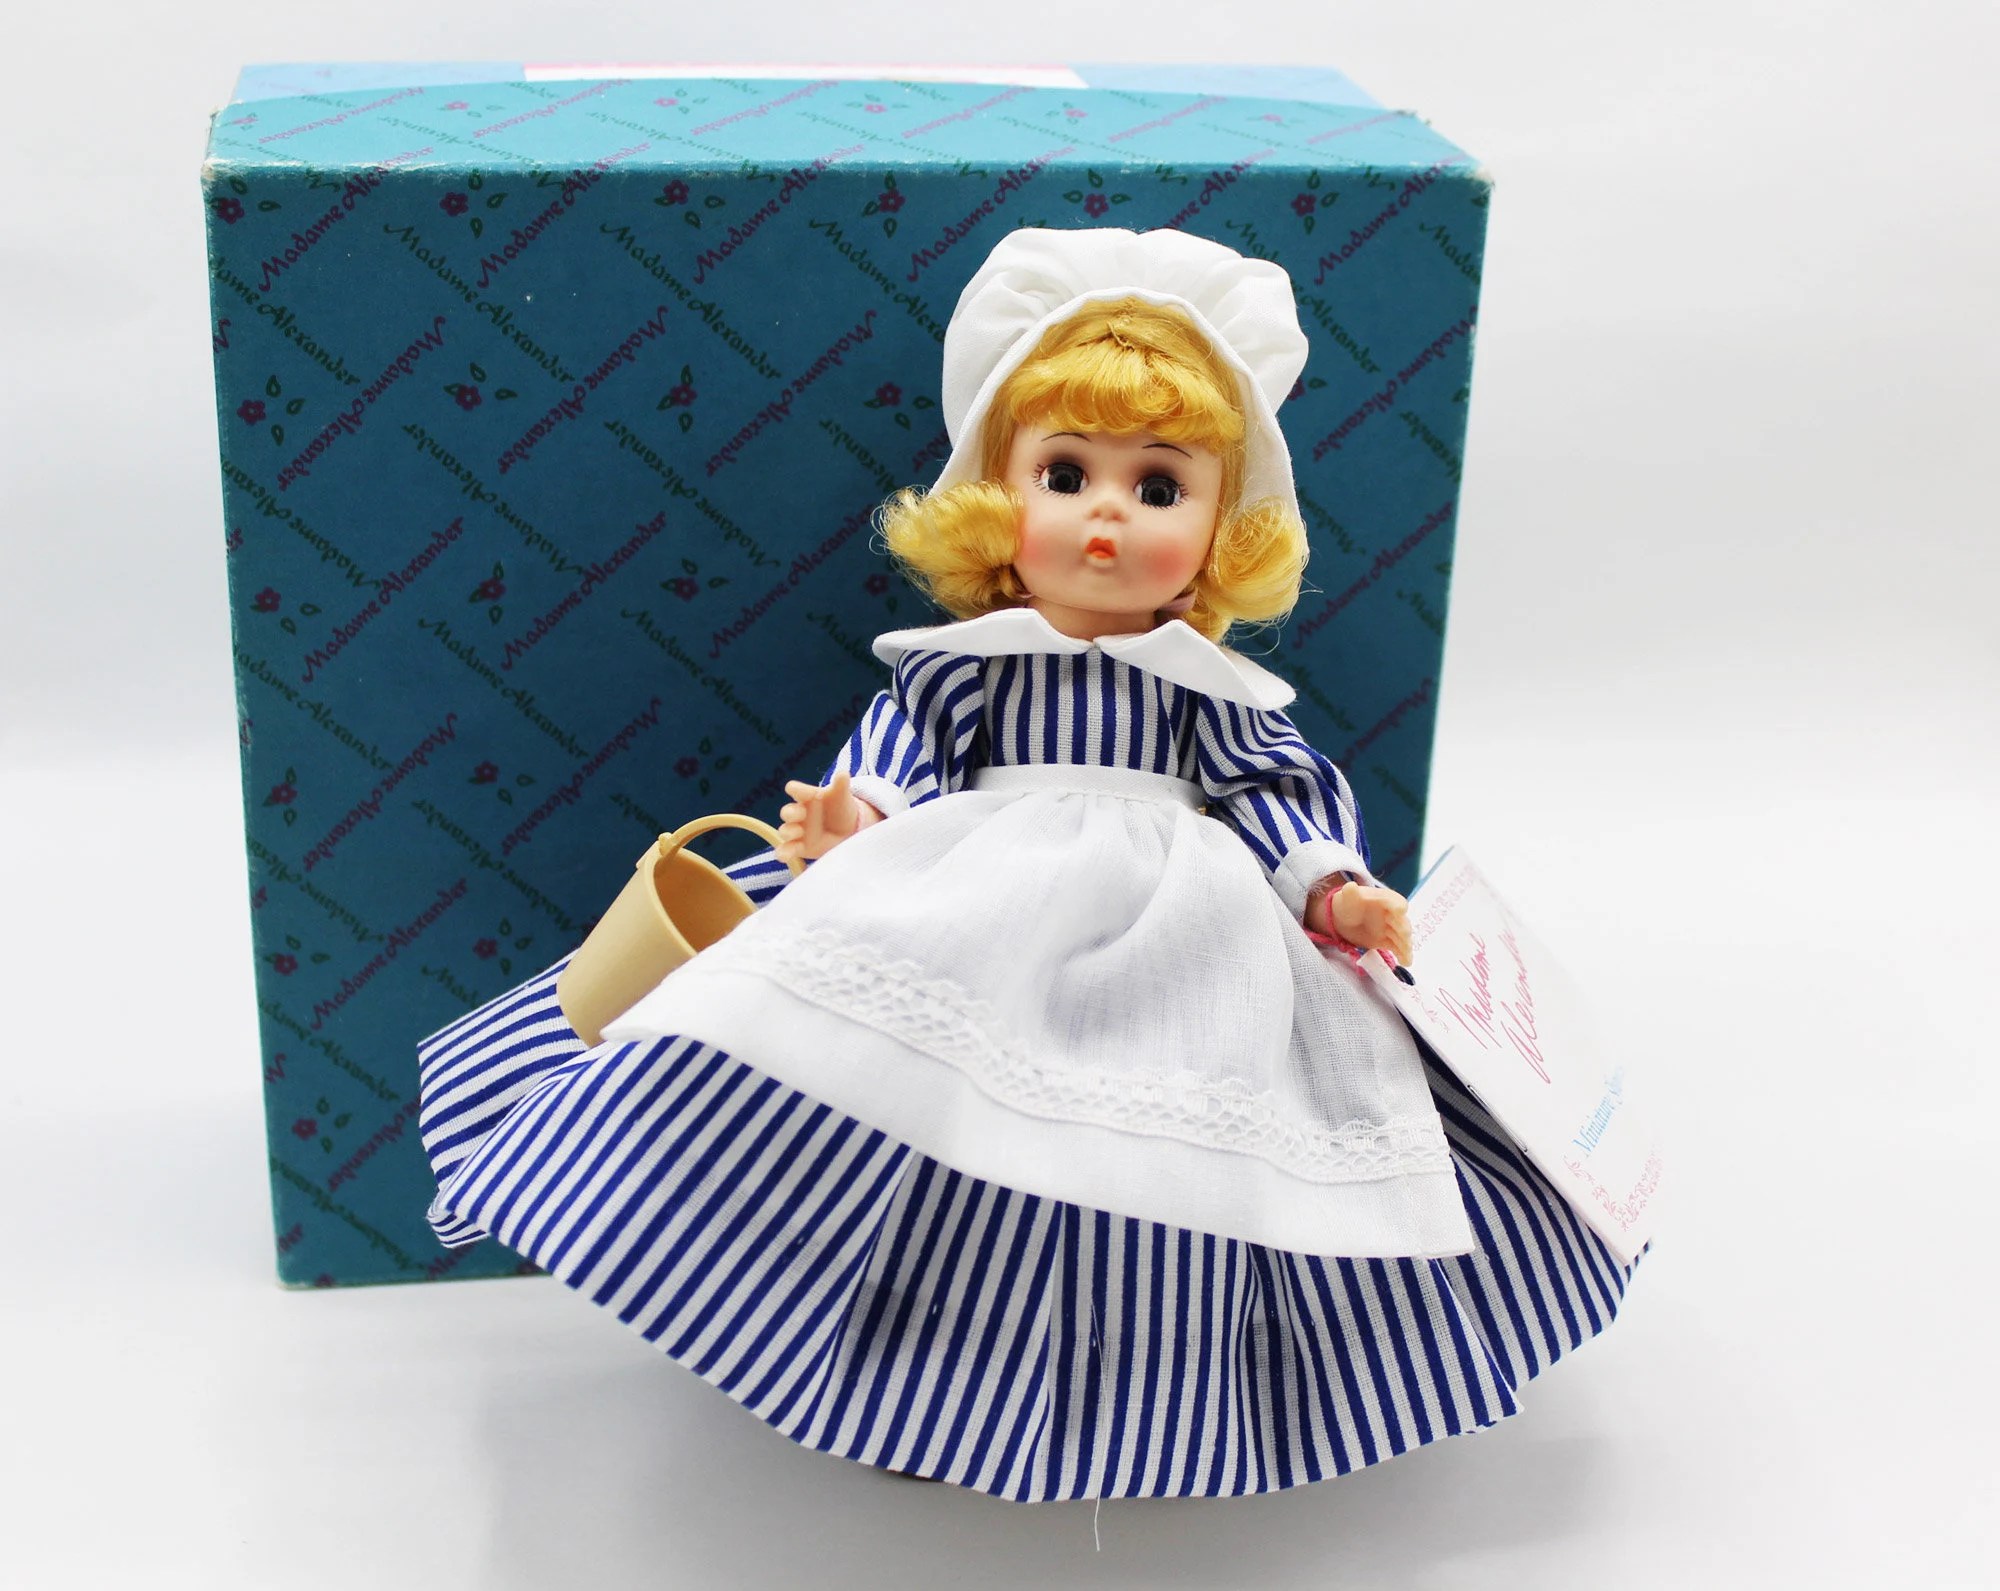 Madame Alexander – Little Maid Doll #423 – Storybook Series – Restrung - Vintage Doll w/ Box & Tag at A Dolly Hobby (Doll B)